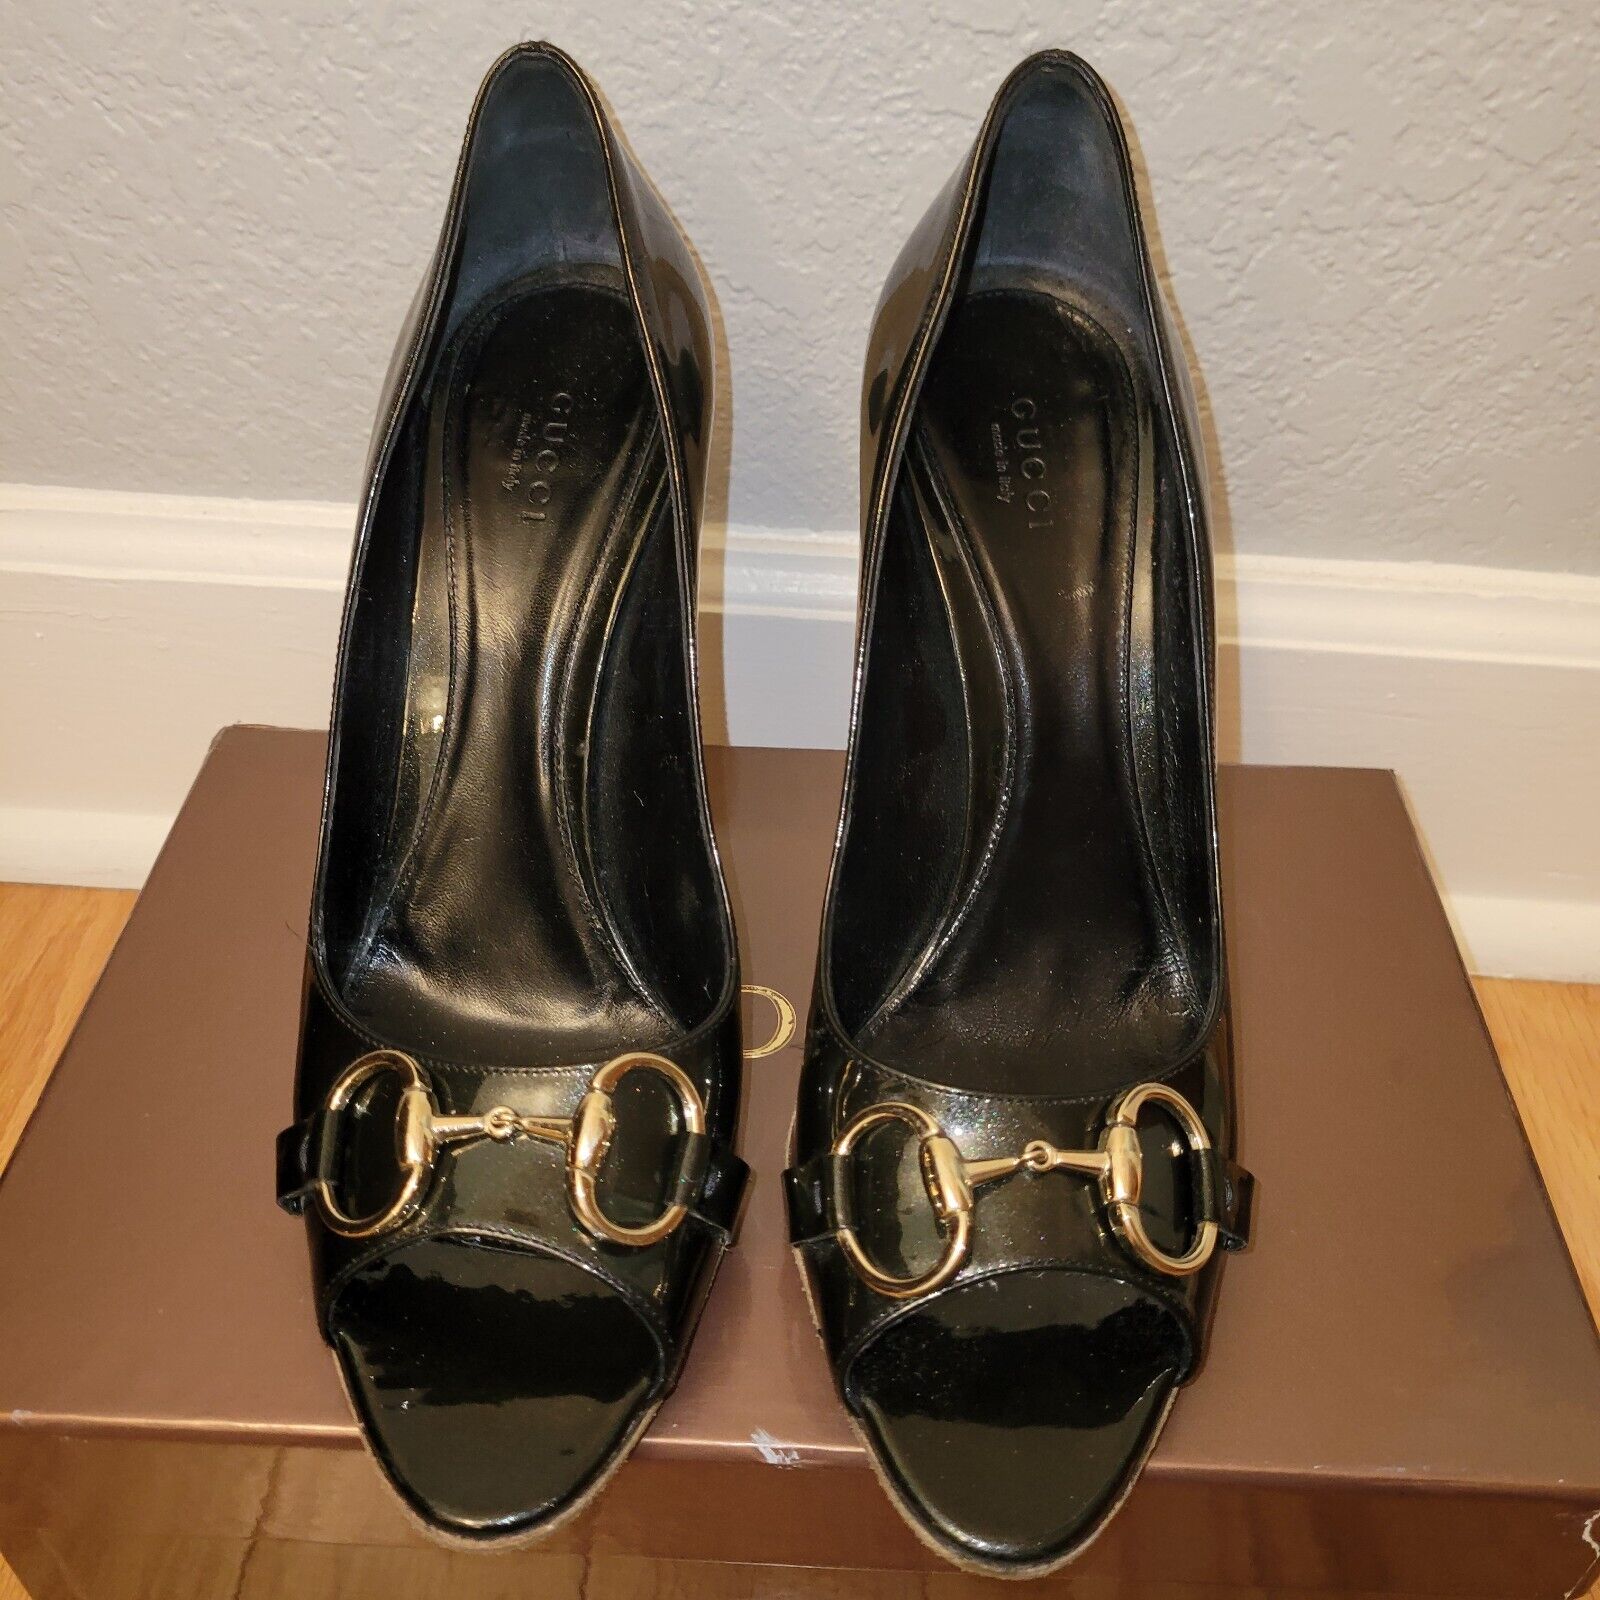 Authentic Black Patent leather  Gucci heels 9B - image 1